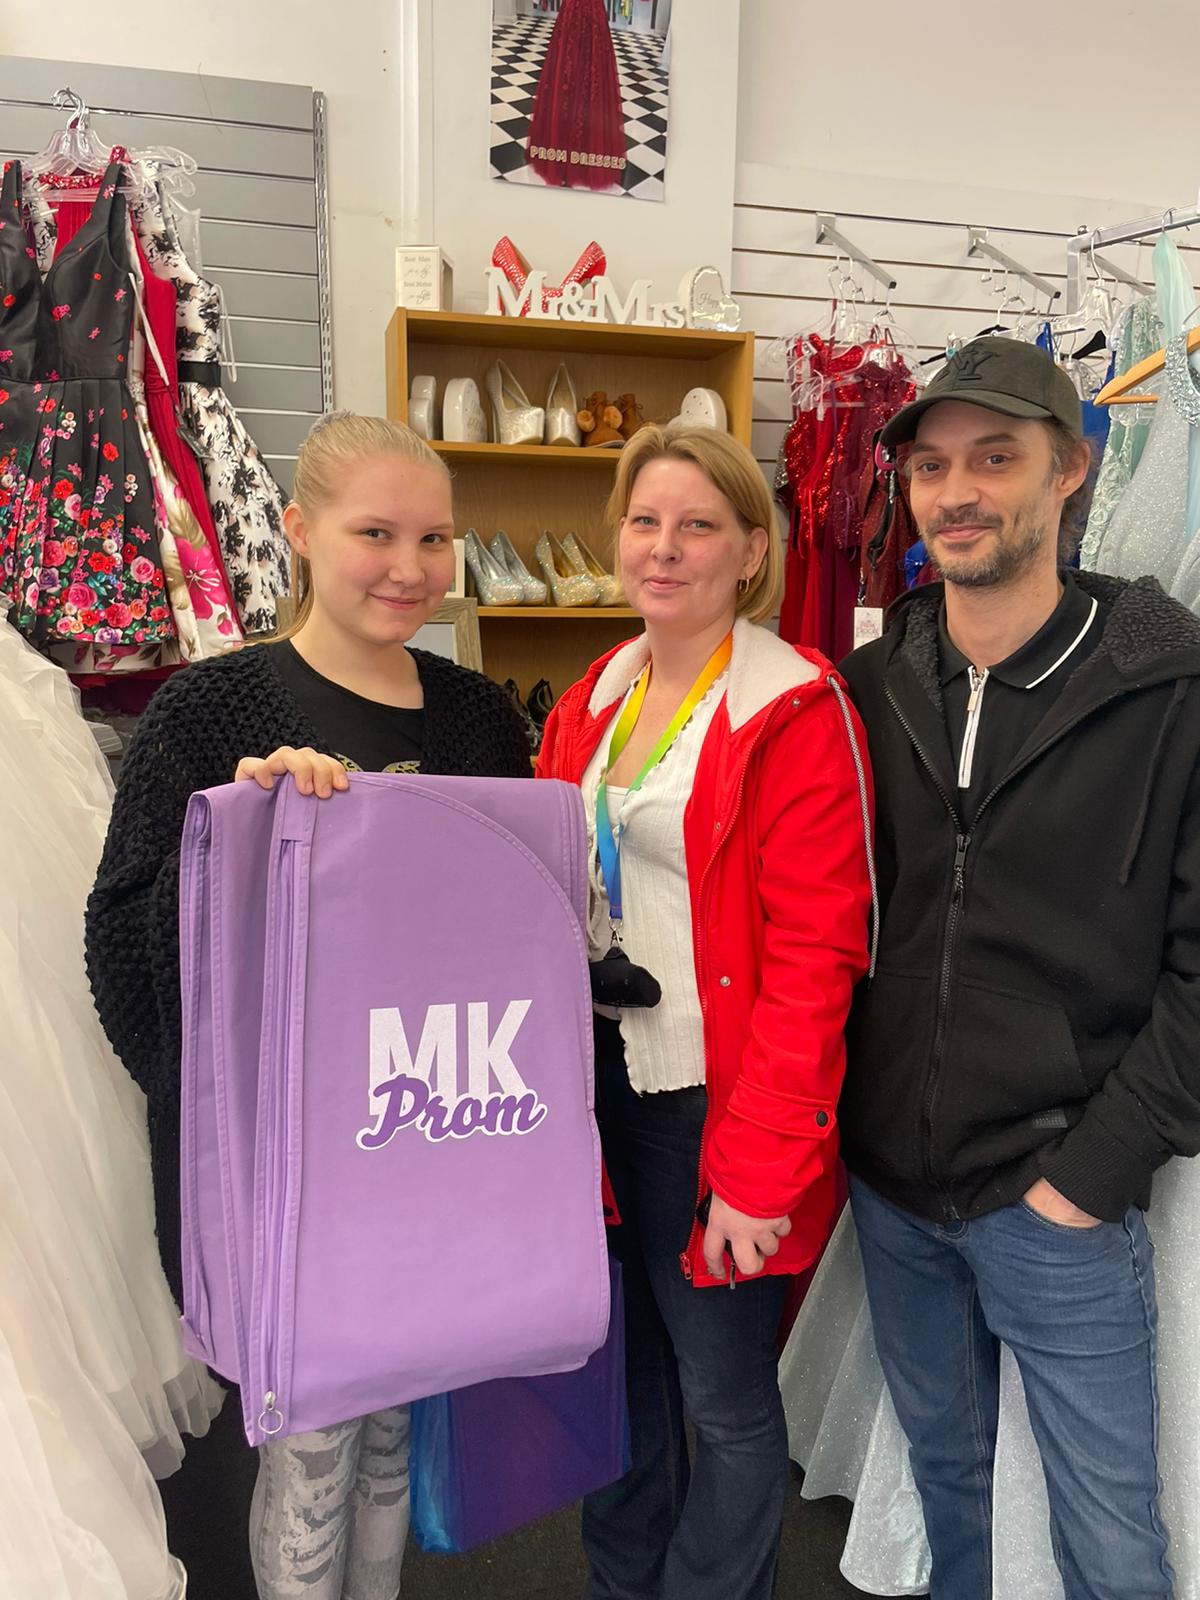 Selecting the perfect prom dress can be a family affair -- a second opinion never hurts, as this family found out at MK Prom in Bletchley, Milton Keynes!